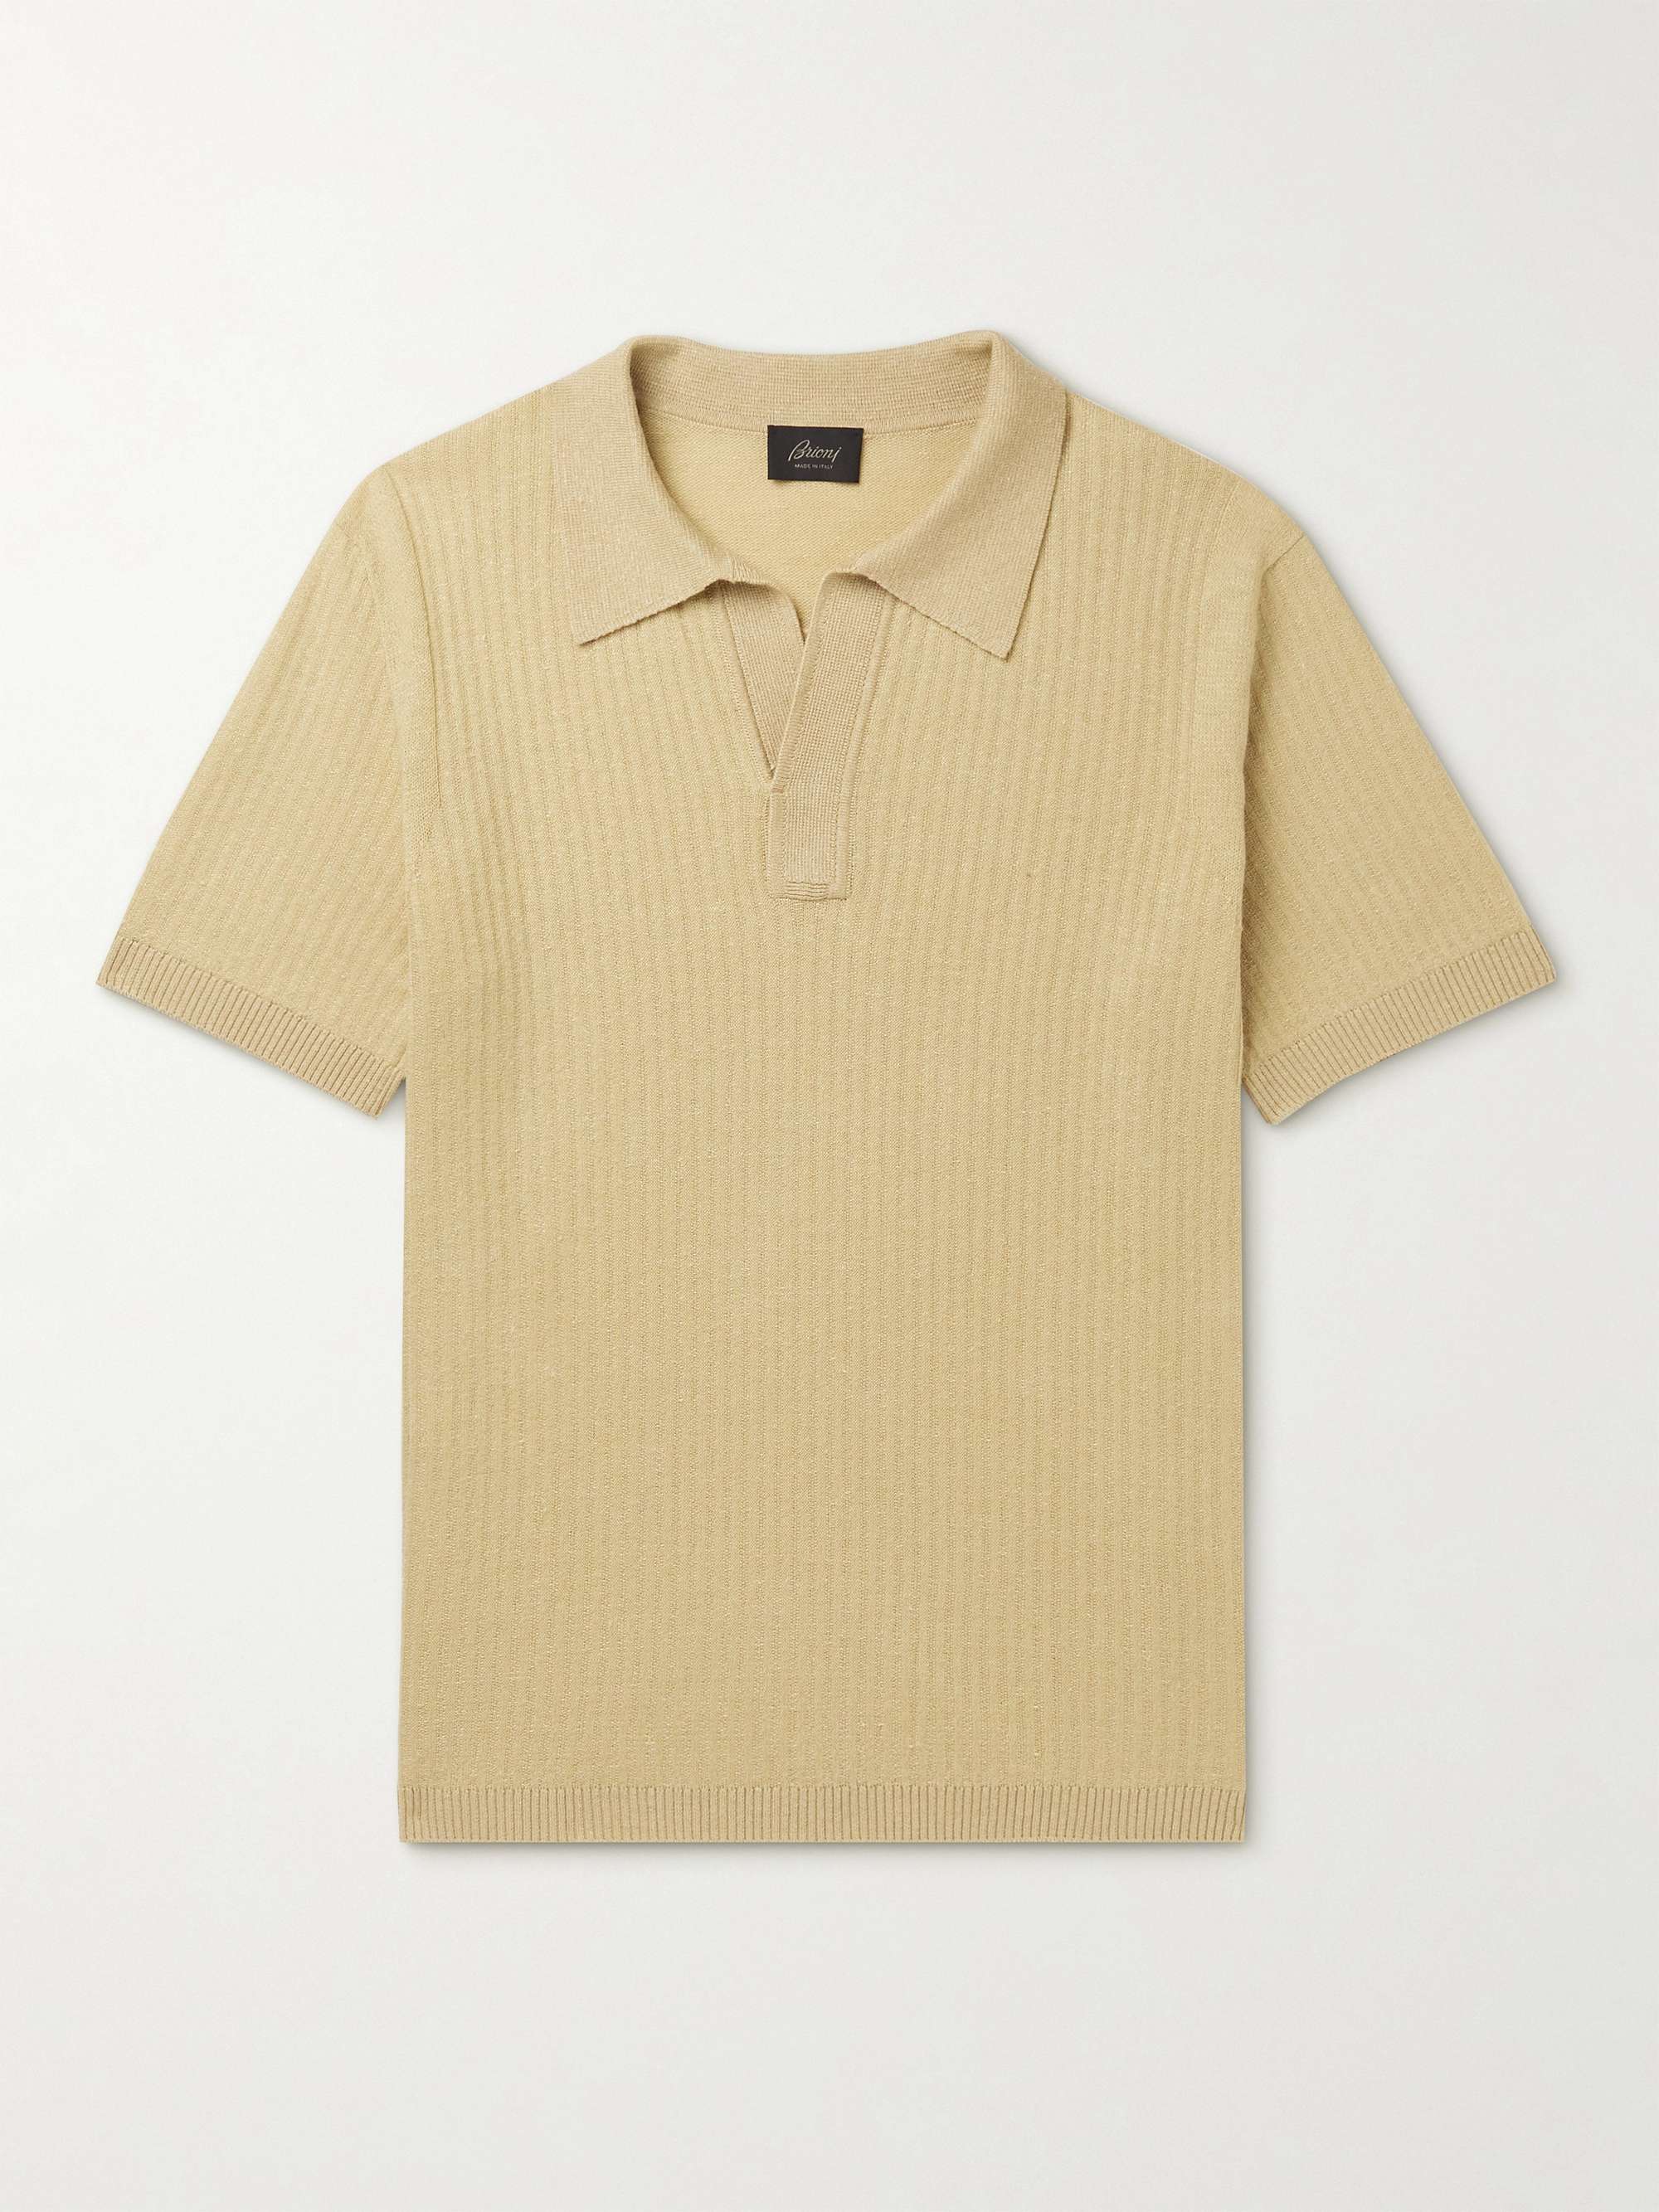 BRIONI Ribbed Cotton, Linen and Cashmere-Blend Polo Shirt